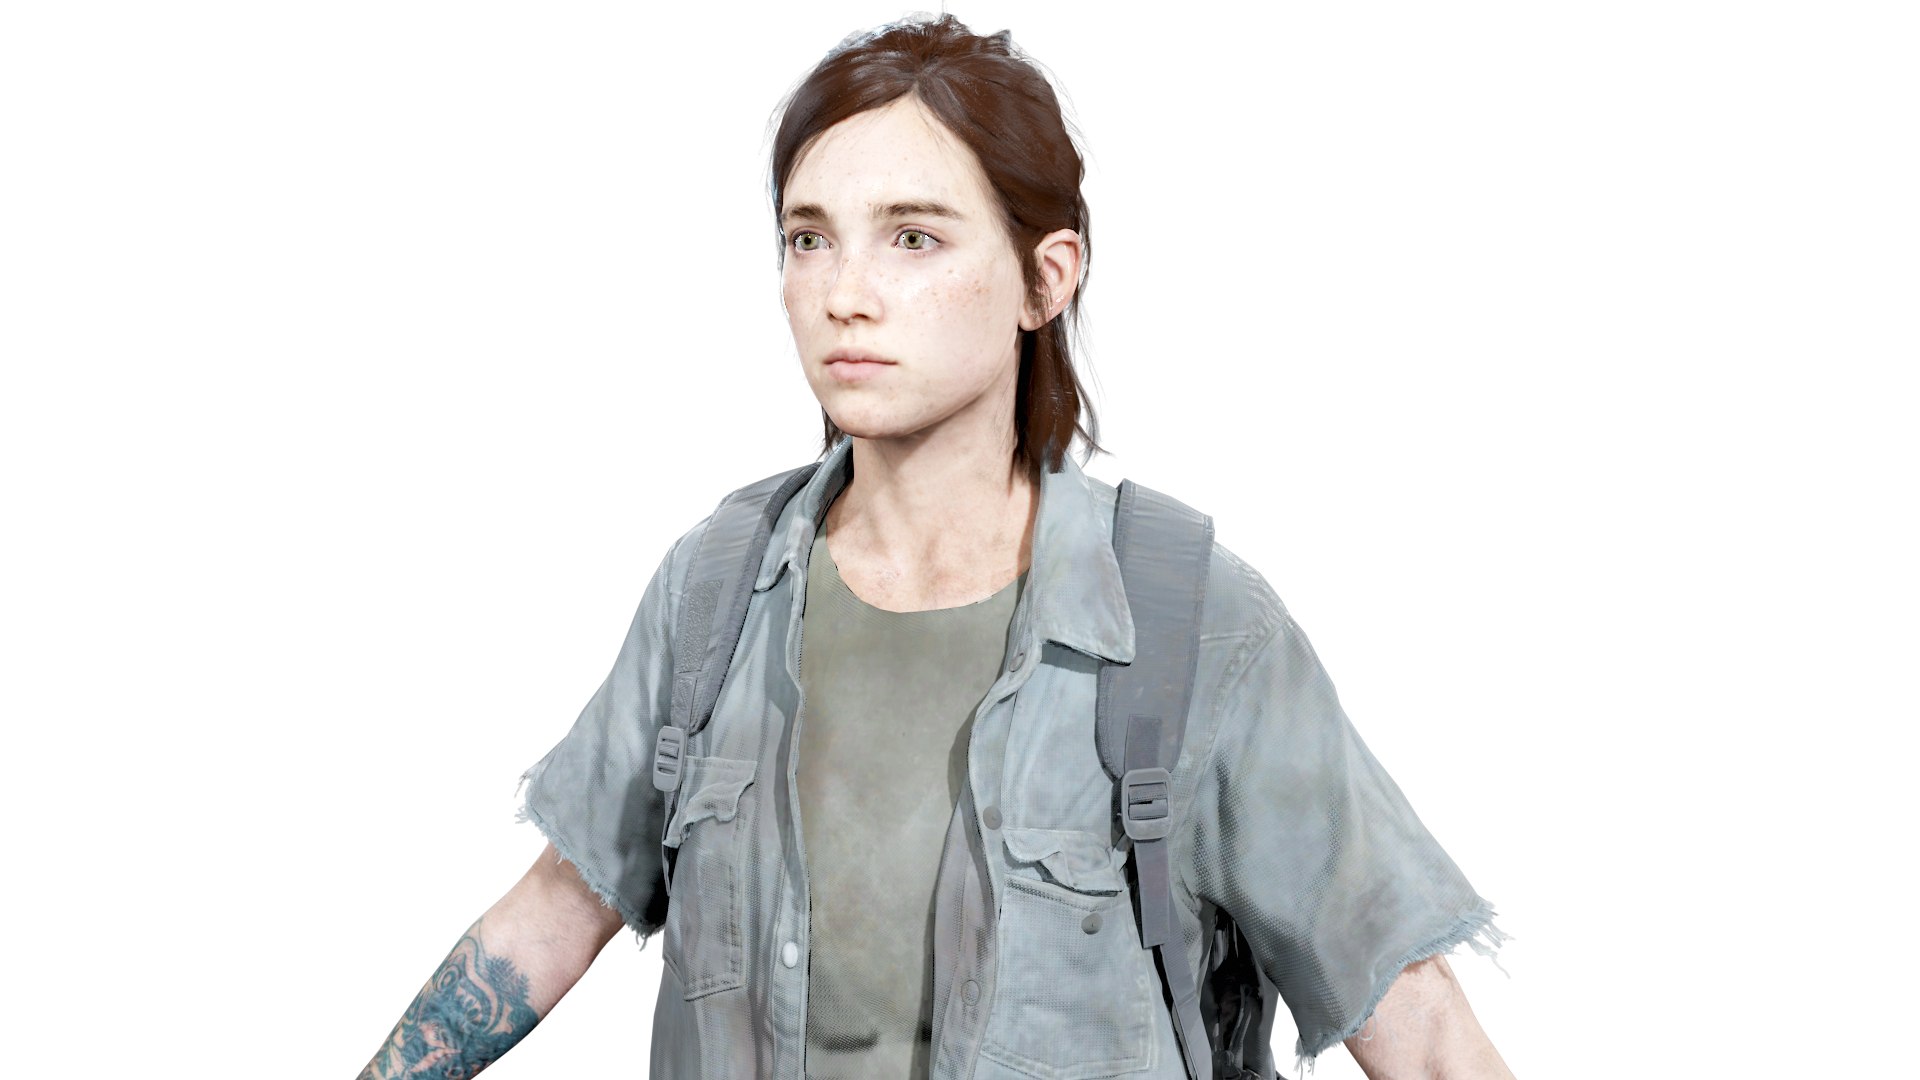 Ellie from The Last of Us Part 2 - Finished Projects - Blender